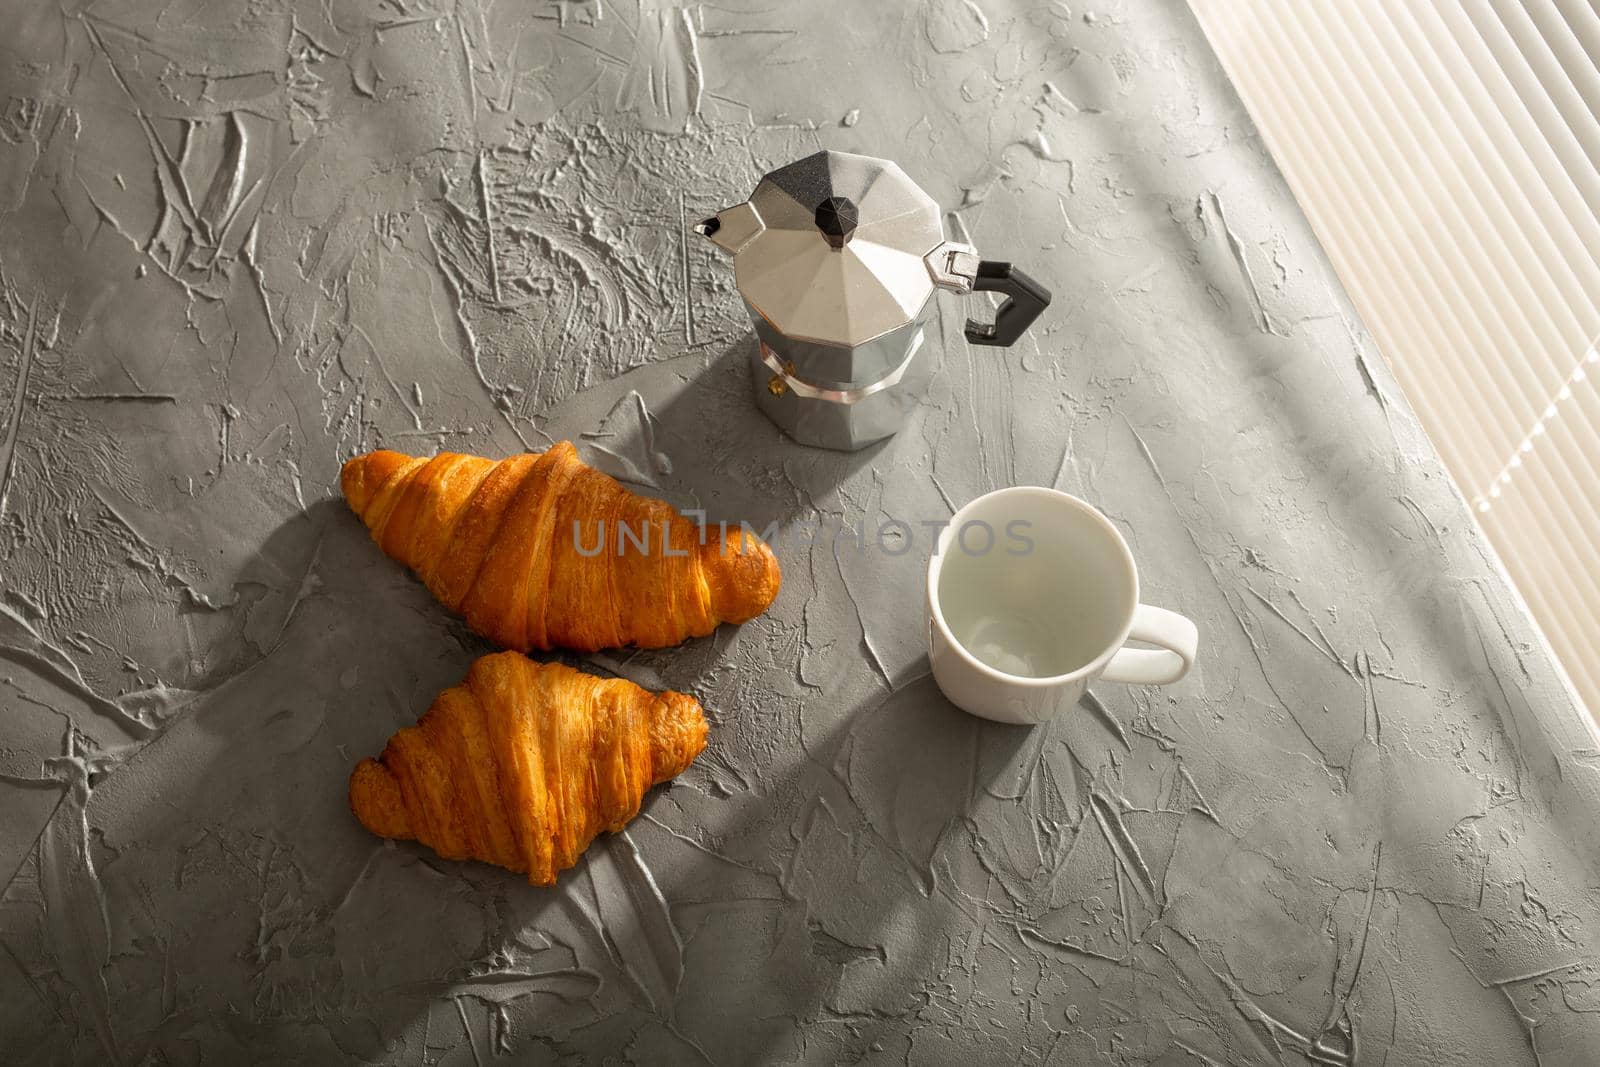 Breakfast with croissant on cutting board and black coffee. Morning meal and breakfast.